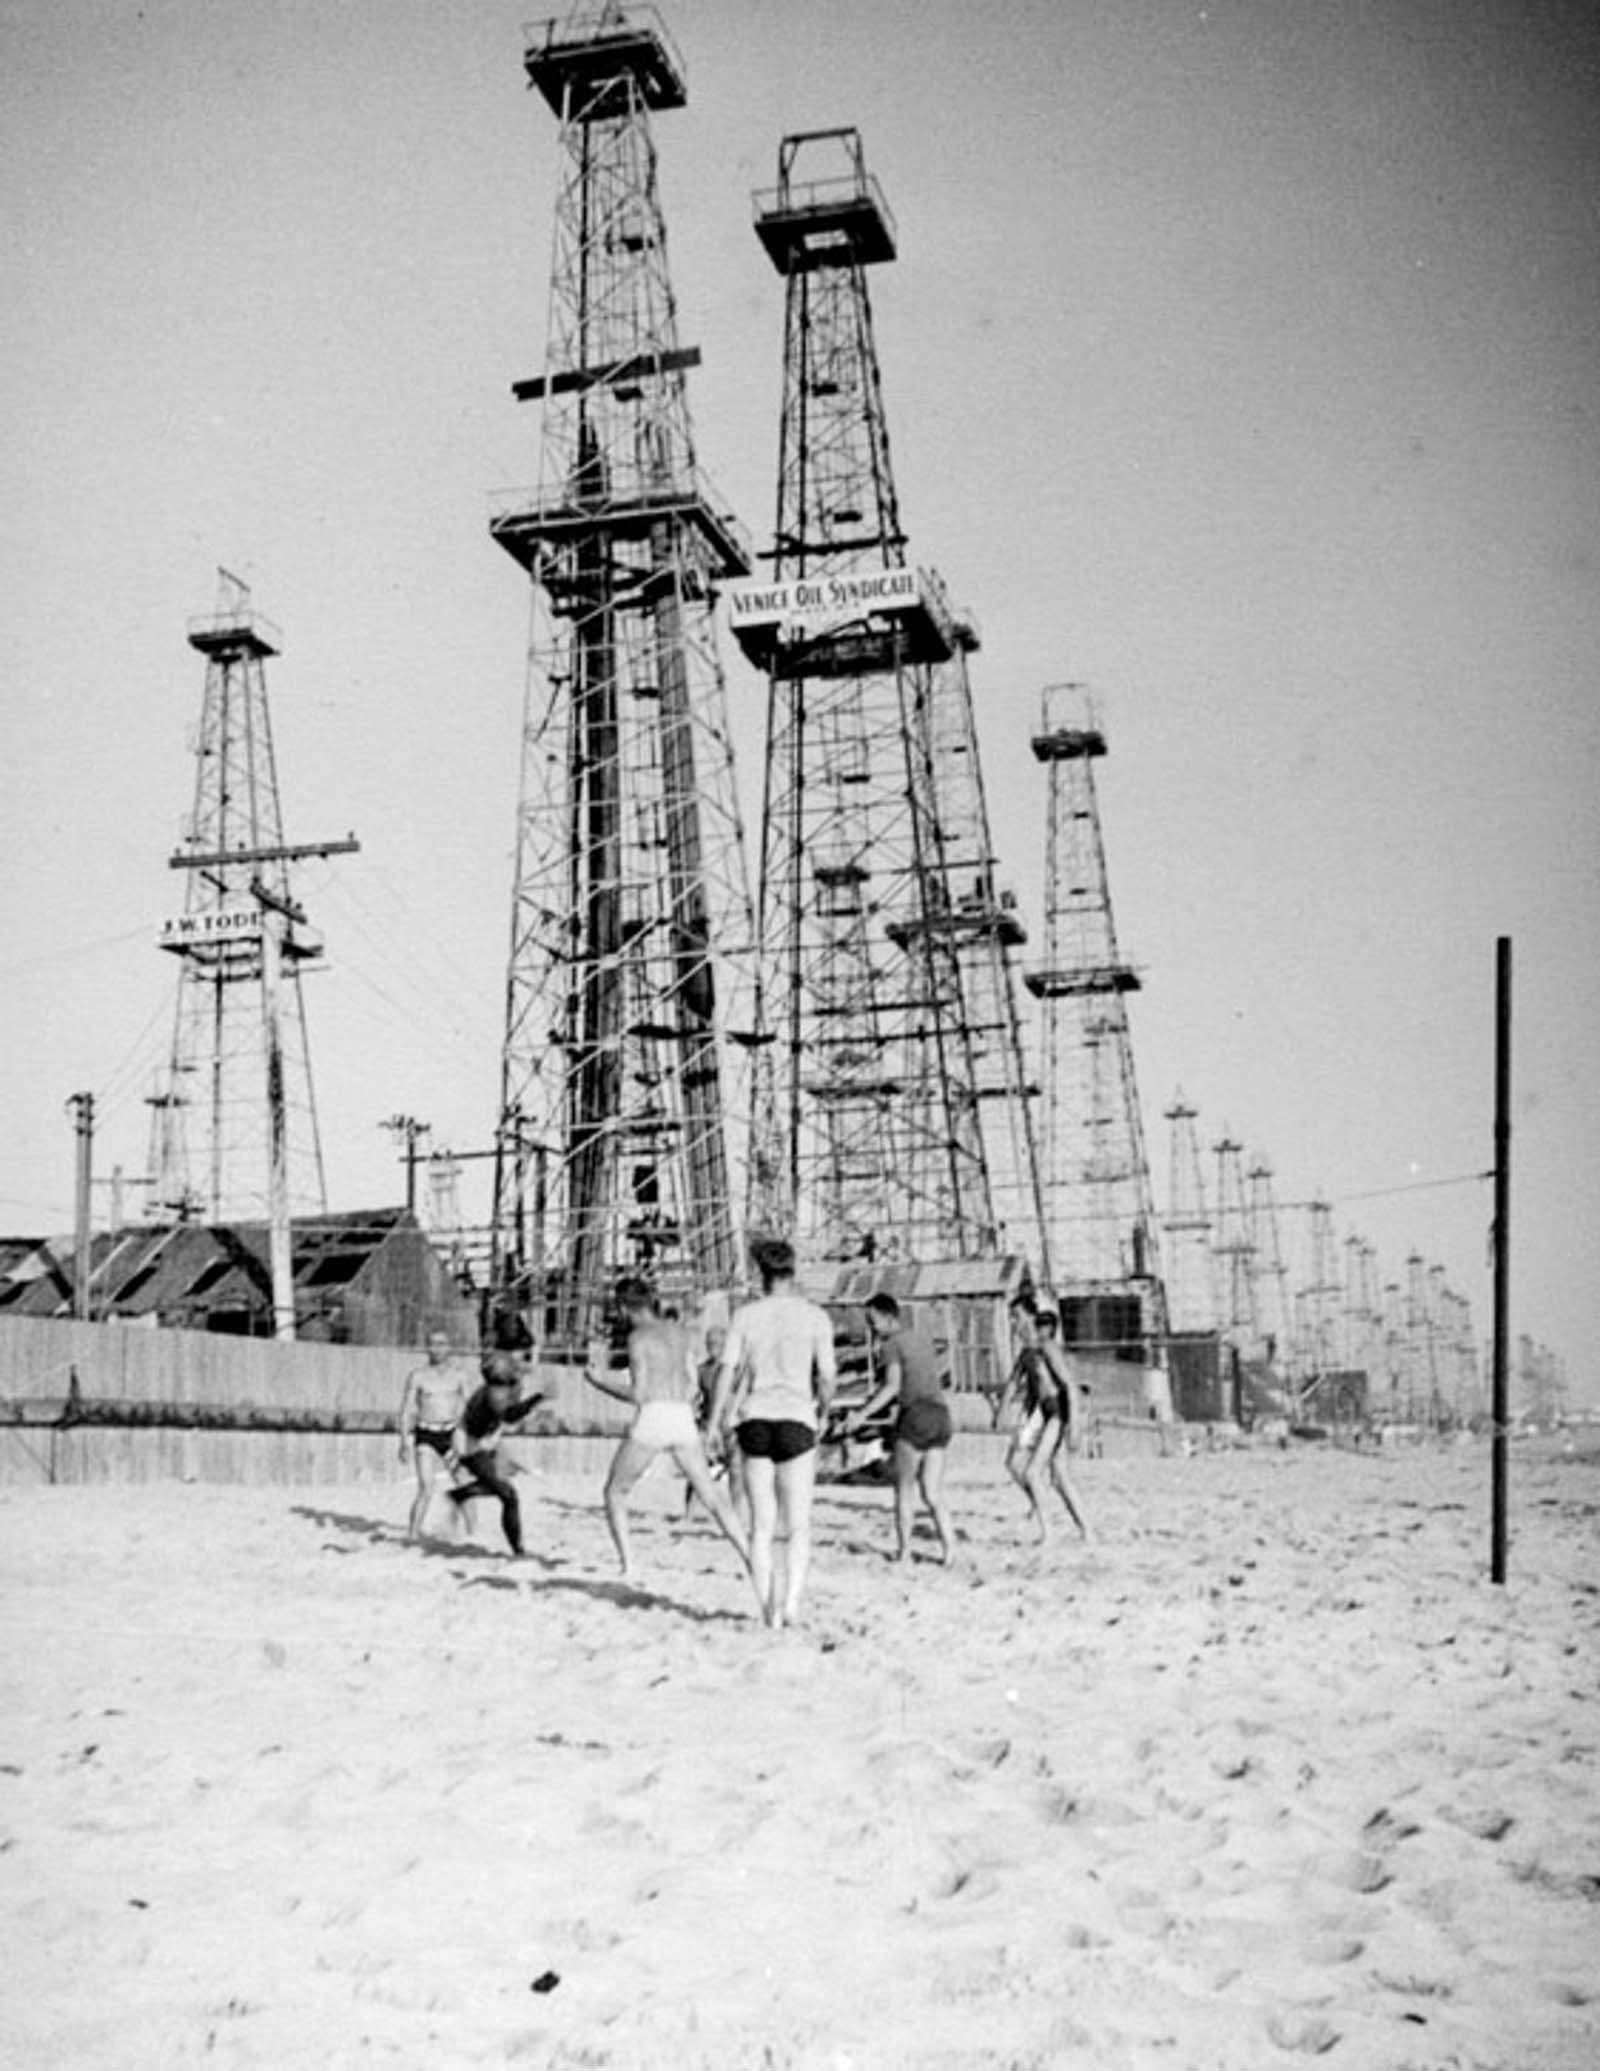 Men play volleyball on the beach next to the Venice oilfield, 1937.